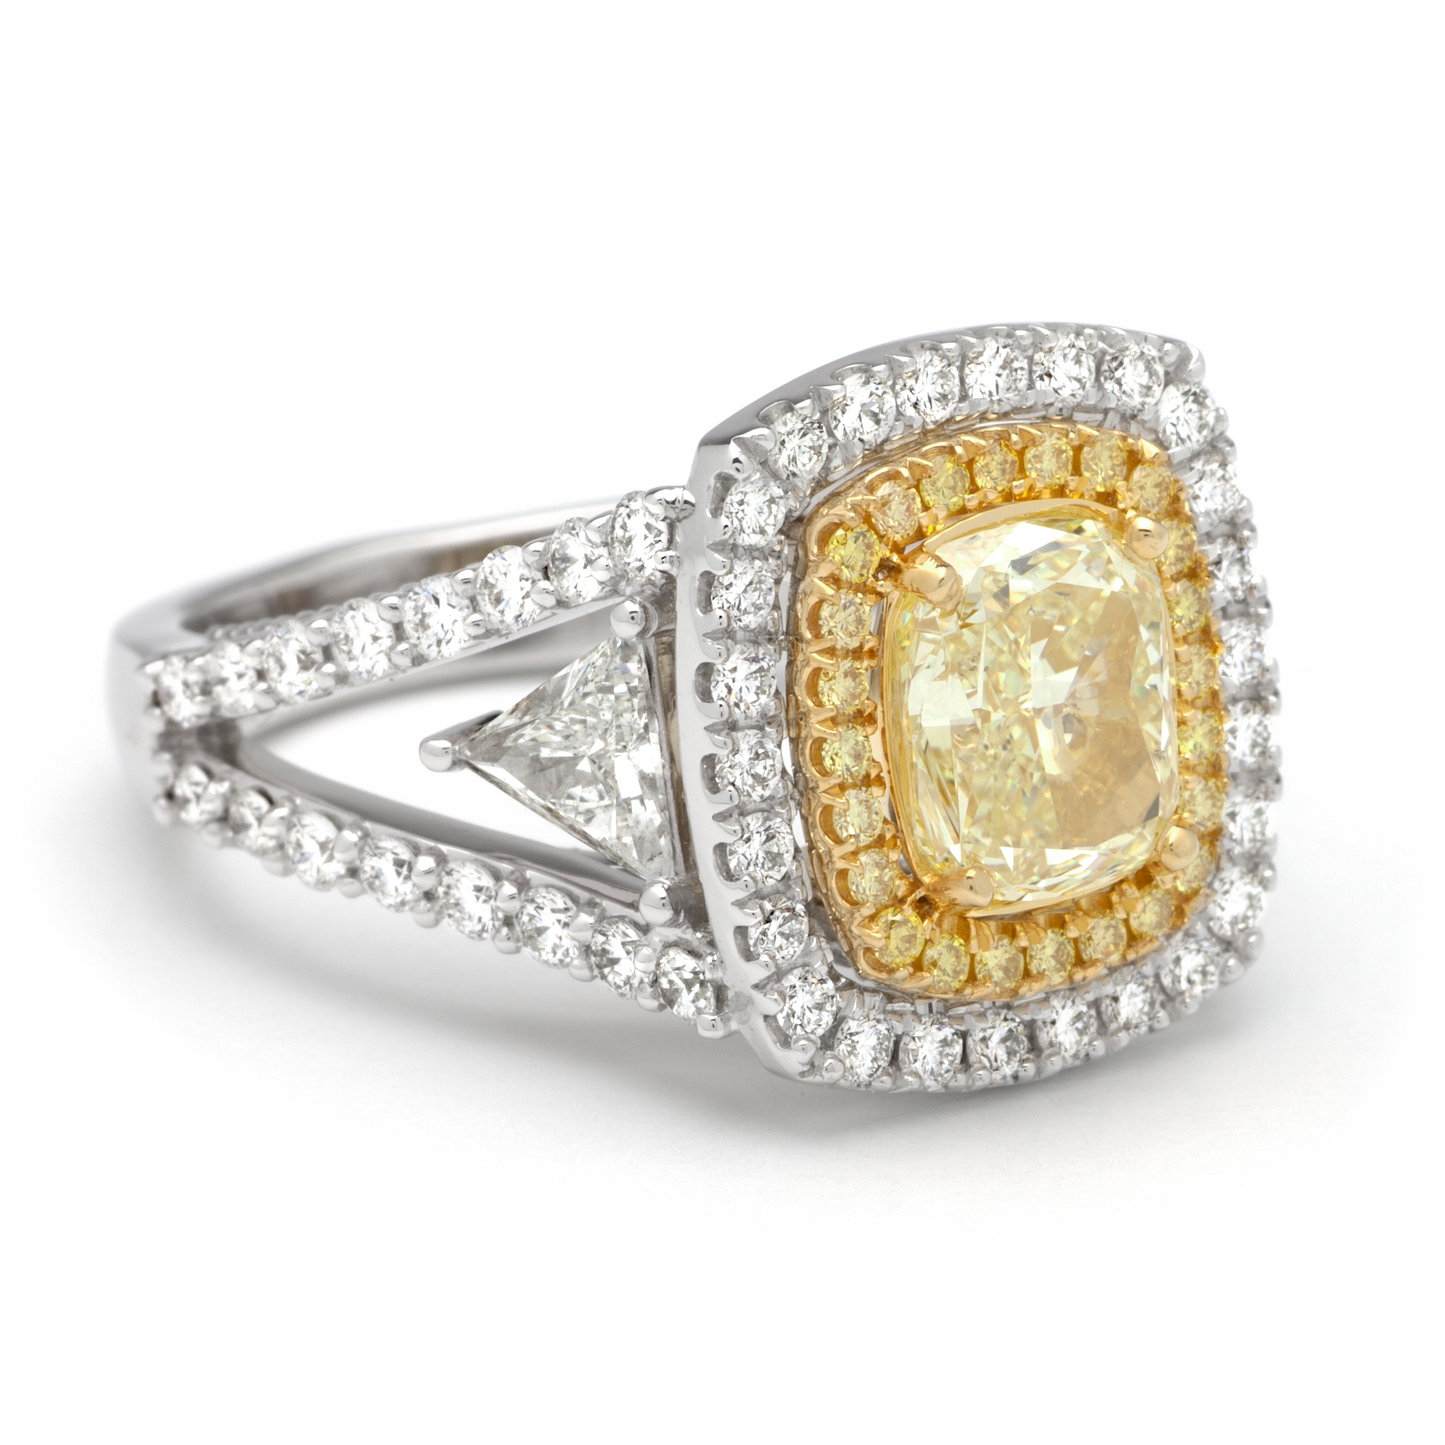 2.01ct Cushion Yellow Diamond Double Halo Engagement Ring in 14k; 4.01 ctw